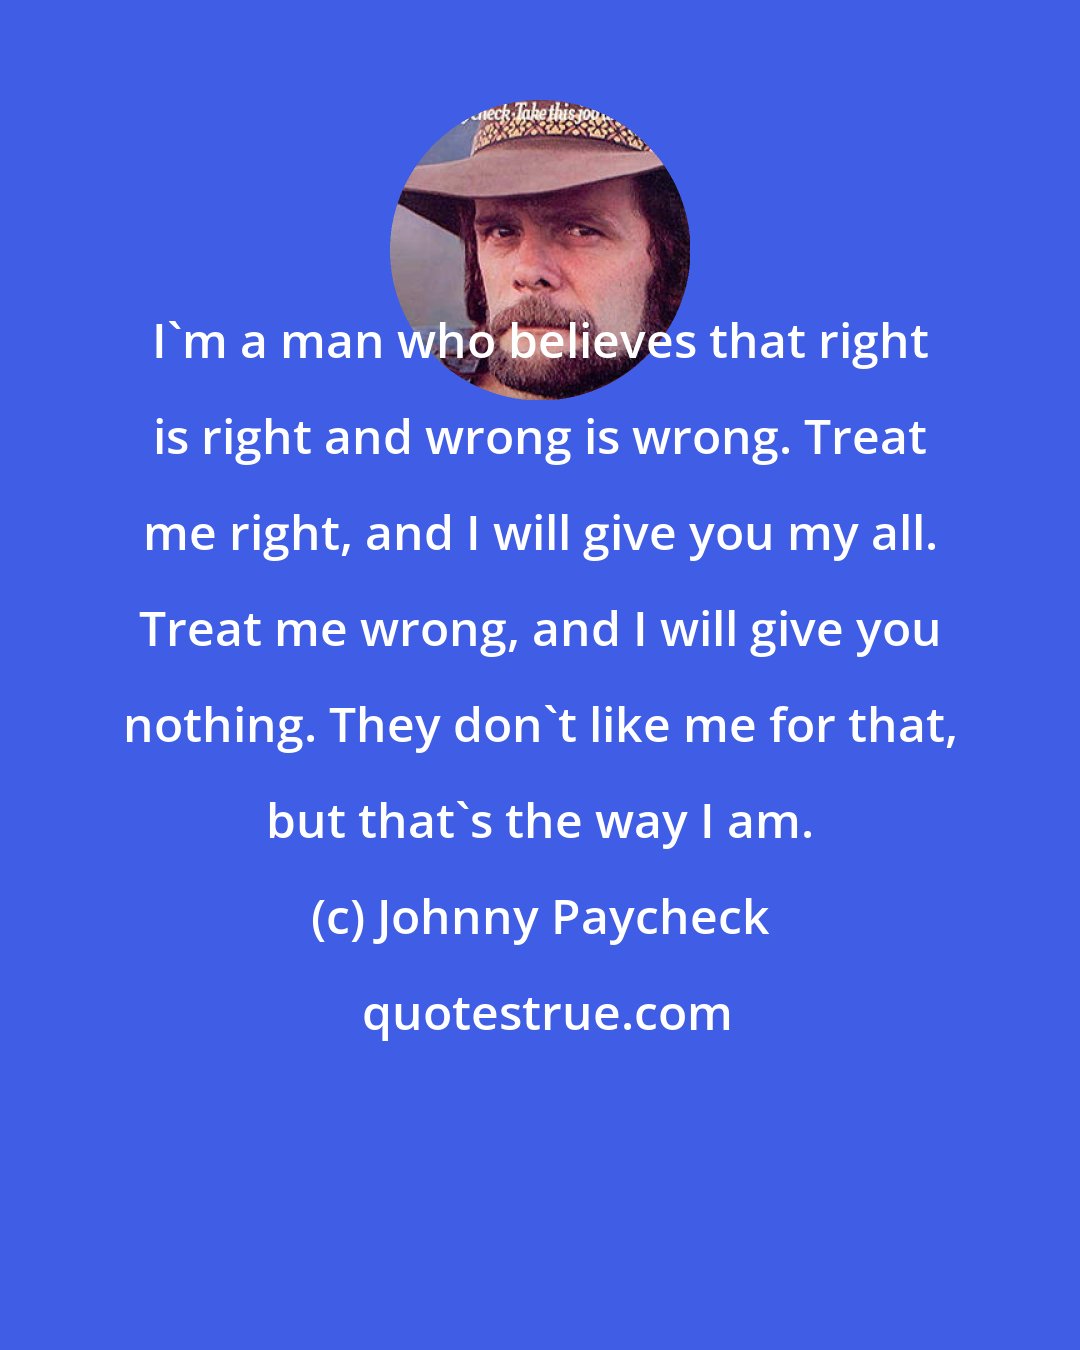 Johnny Paycheck: I'm a man who believes that right is right and wrong is wrong. Treat me right, and I will give you my all. Treat me wrong, and I will give you nothing. They don't like me for that, but that's the way I am.